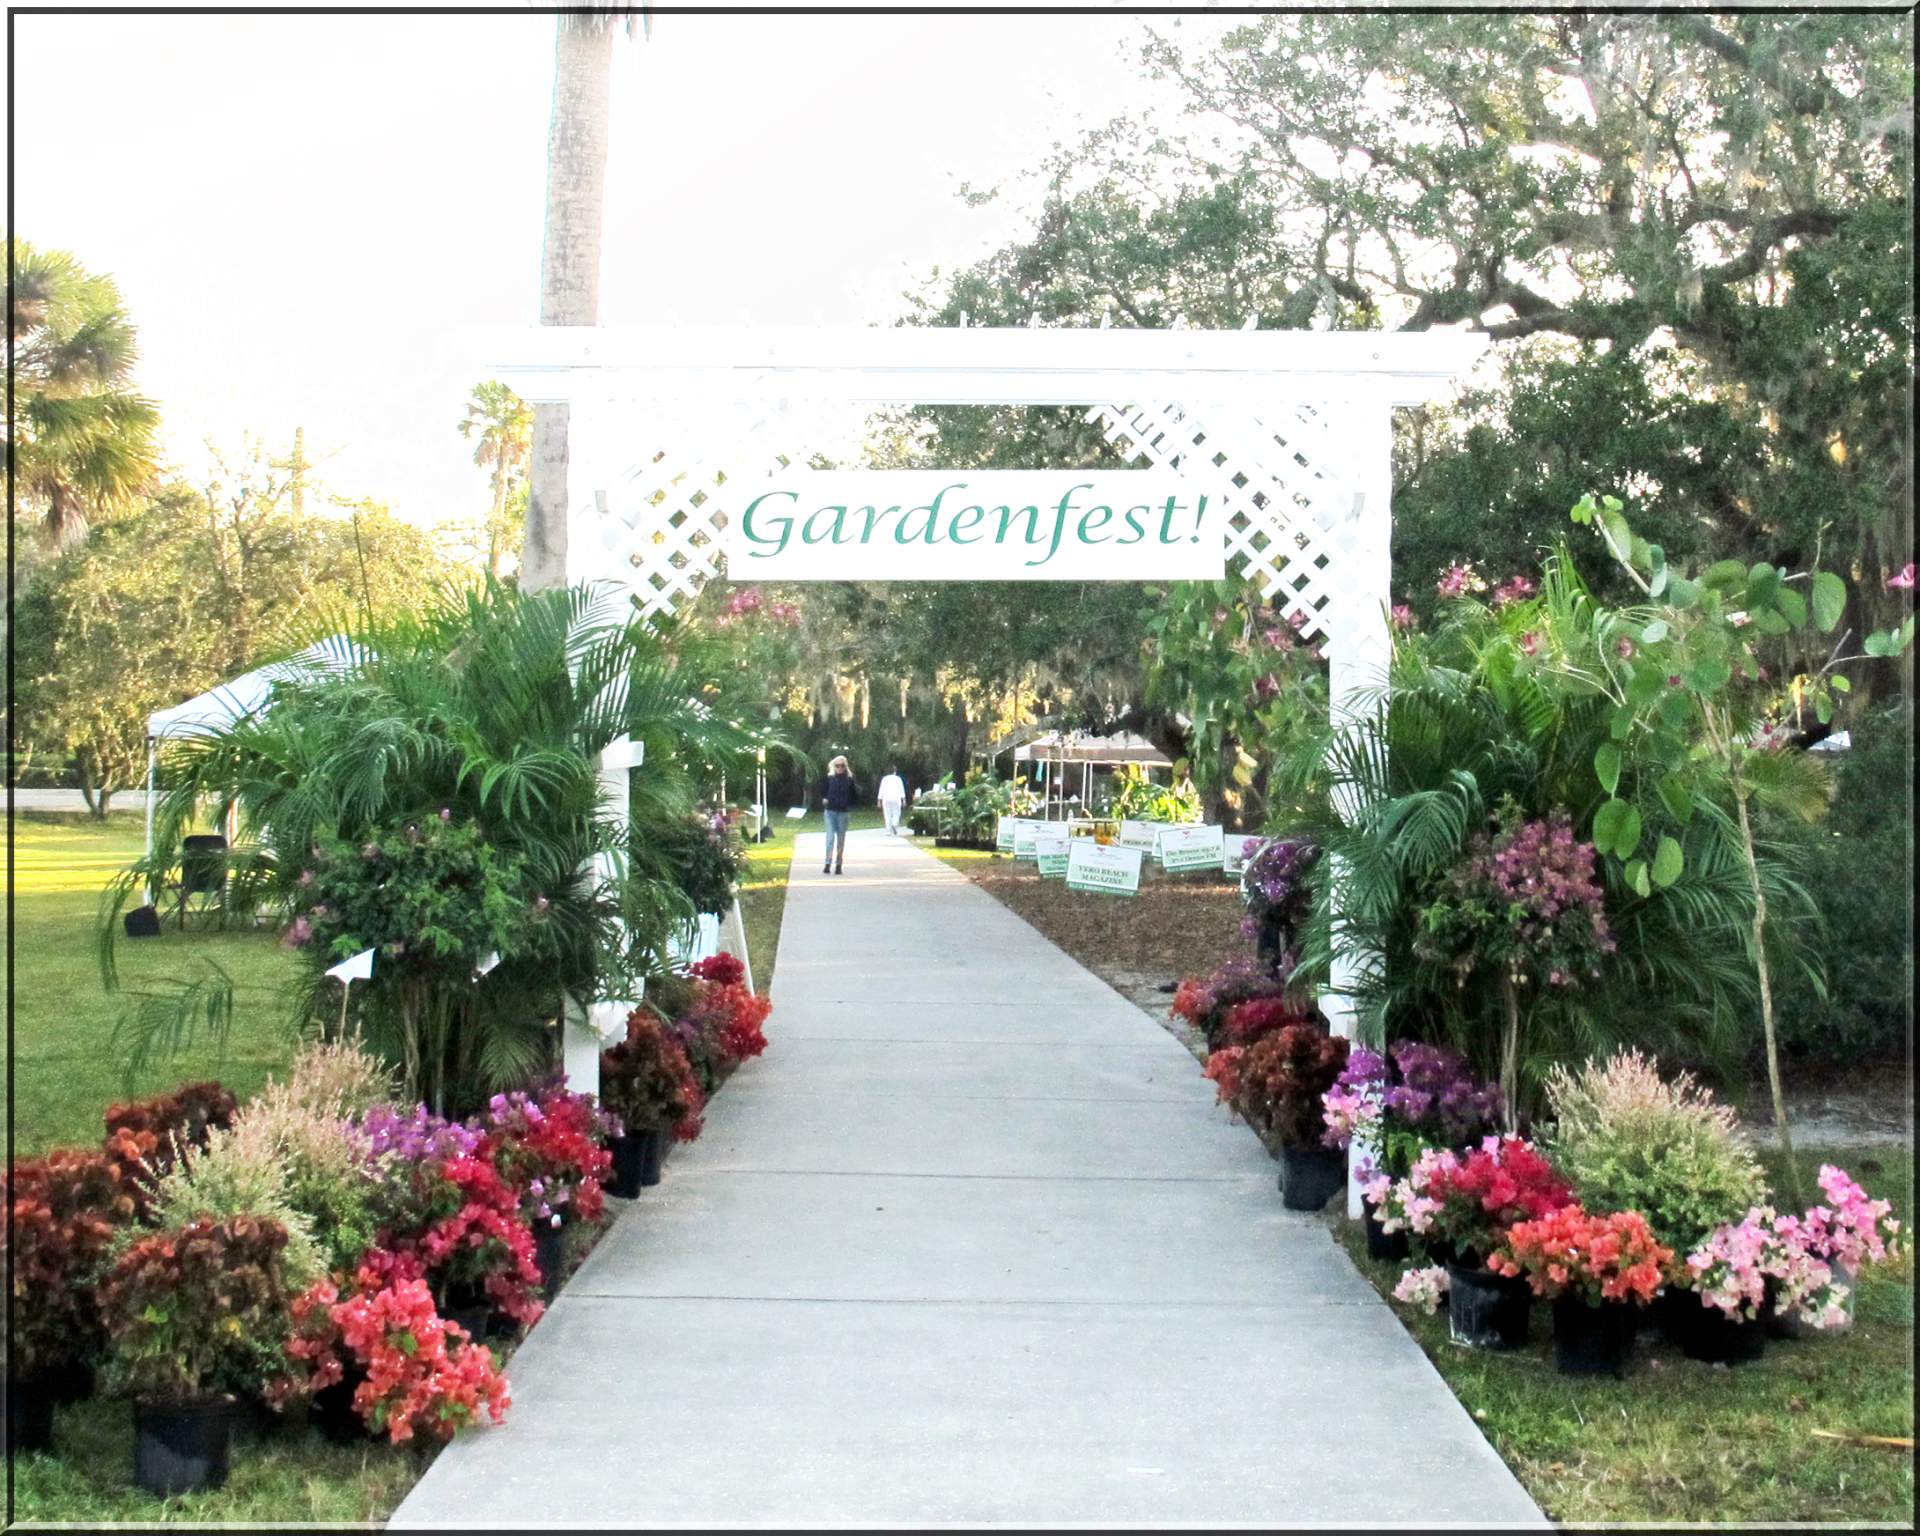 Sidewalk entrance to Gardenfest! with Gardenfest! sign and plants lined along the sidewalk